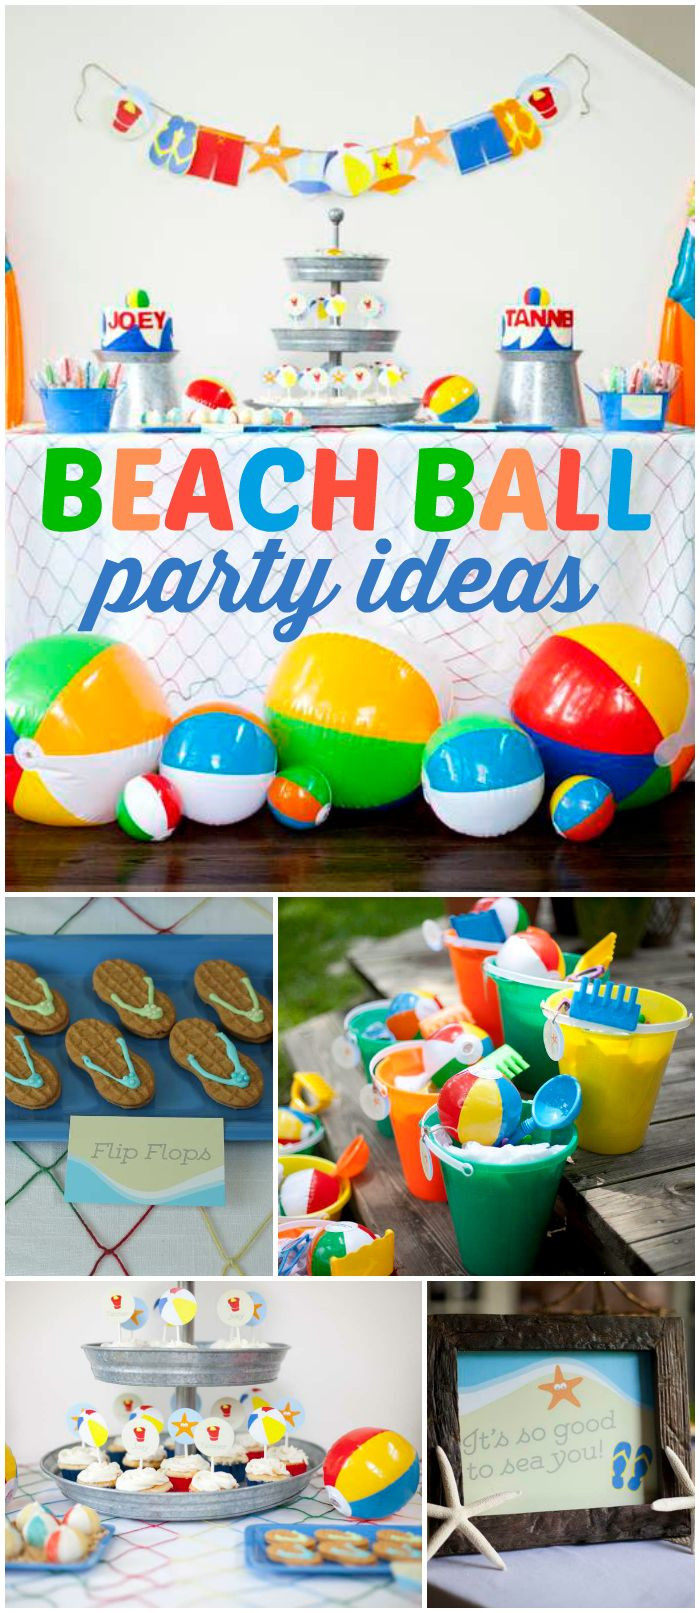 Beach Party Ideas For Adults
 Lots of colorful beach balls are at this fun party See